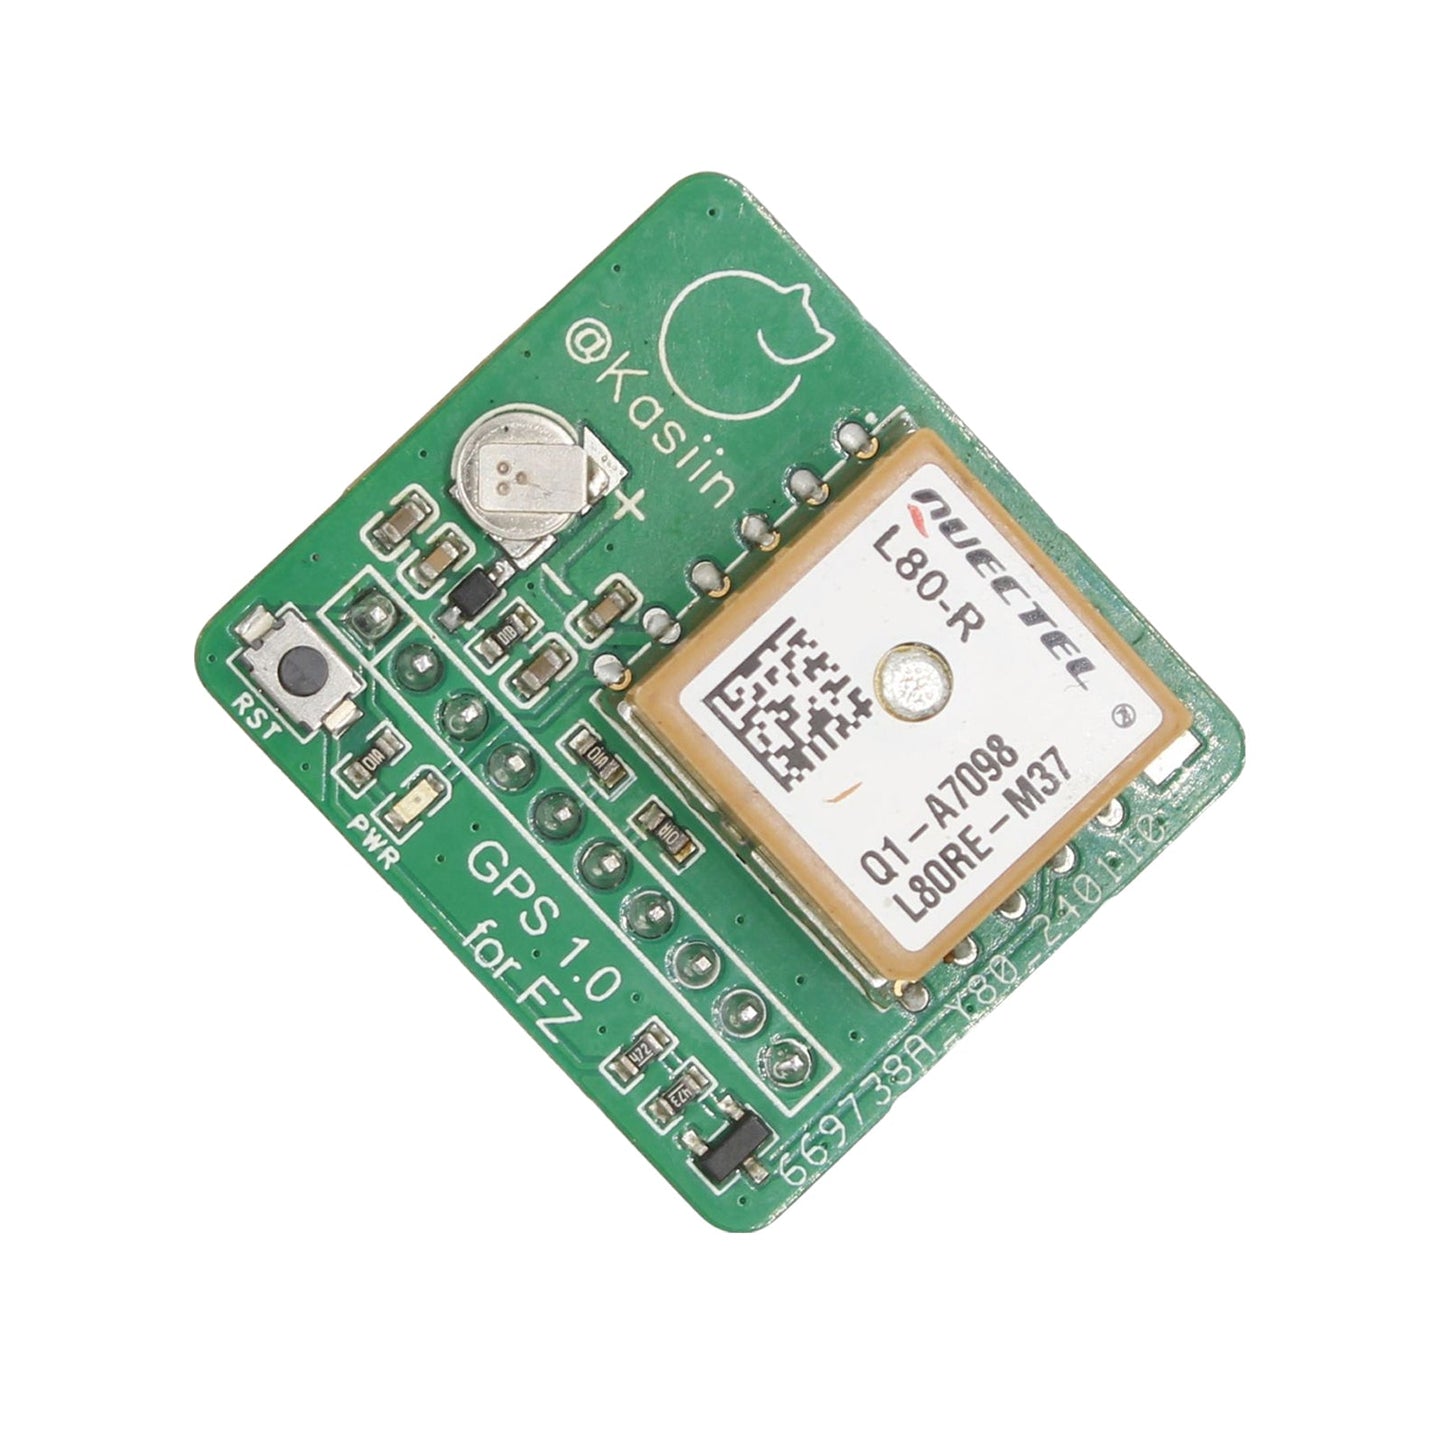 Neues GPS-Modul nutzt Antenna Integrated Module Unleashed Firmware